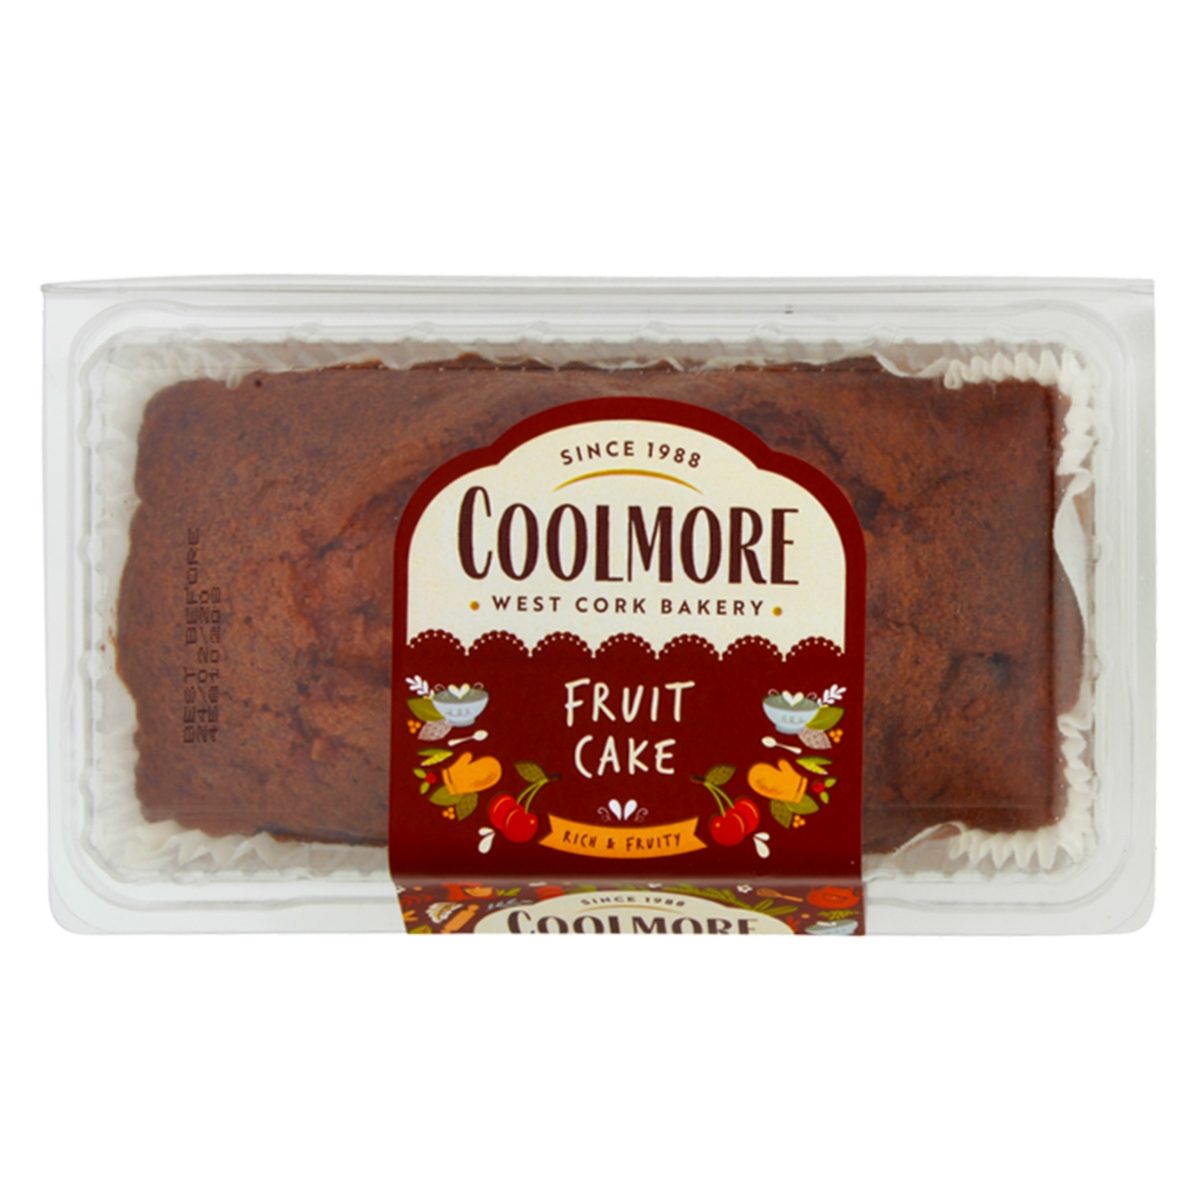 Coolmore West Cork Bakery Fruit Cake 400g (July 23) RRP £2.79 CLEARANCE XL £1